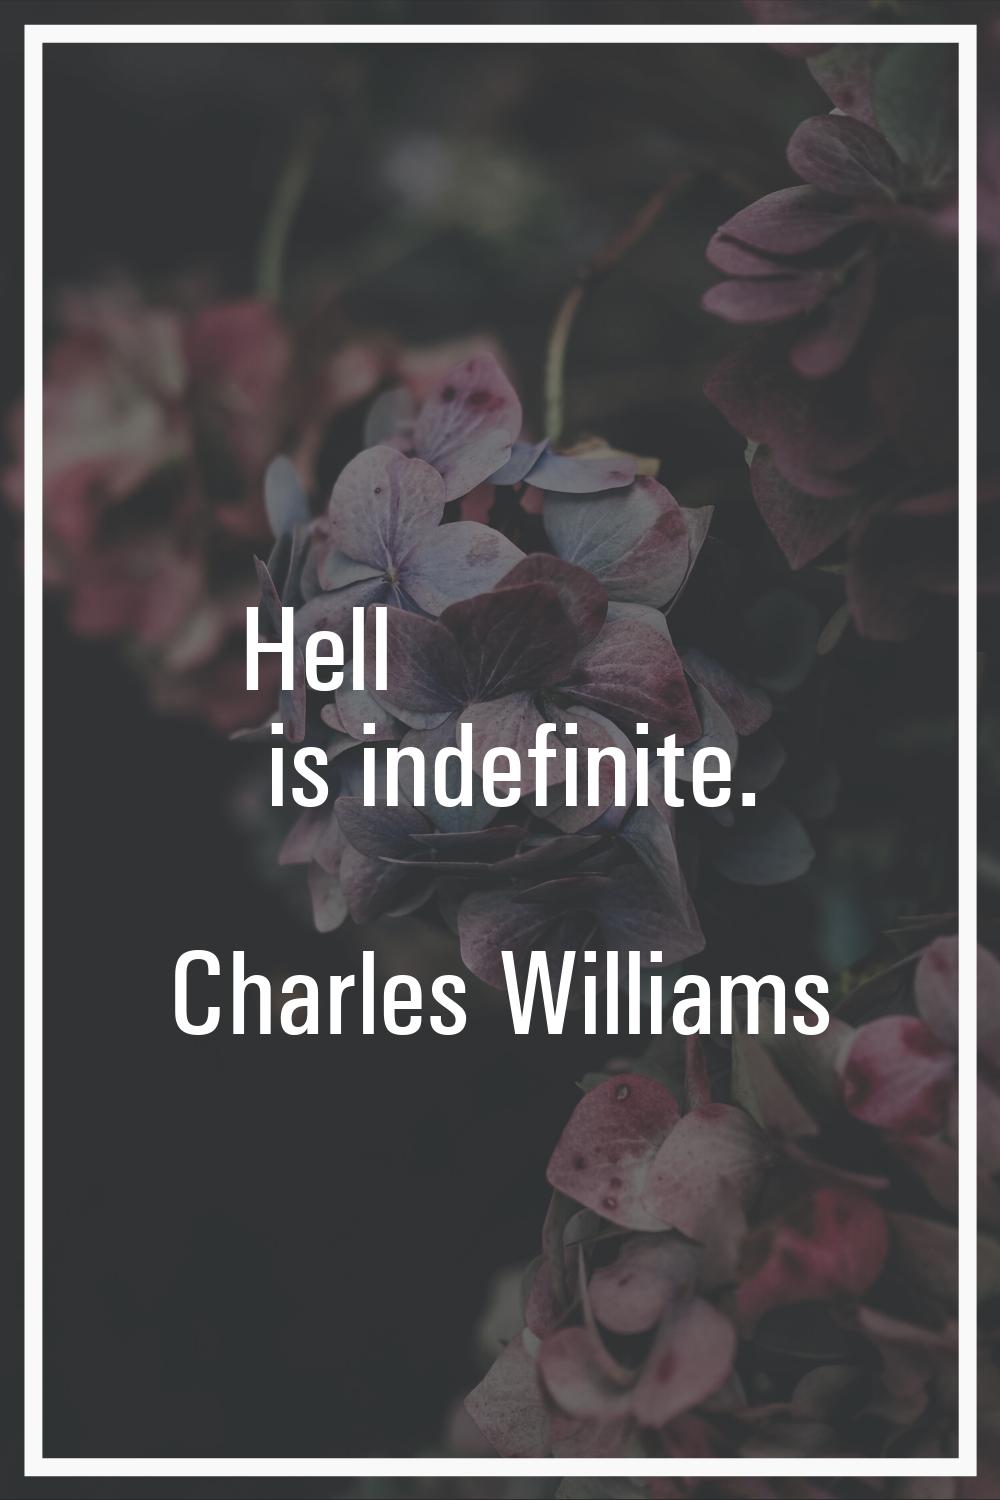 Hell is indefinite.